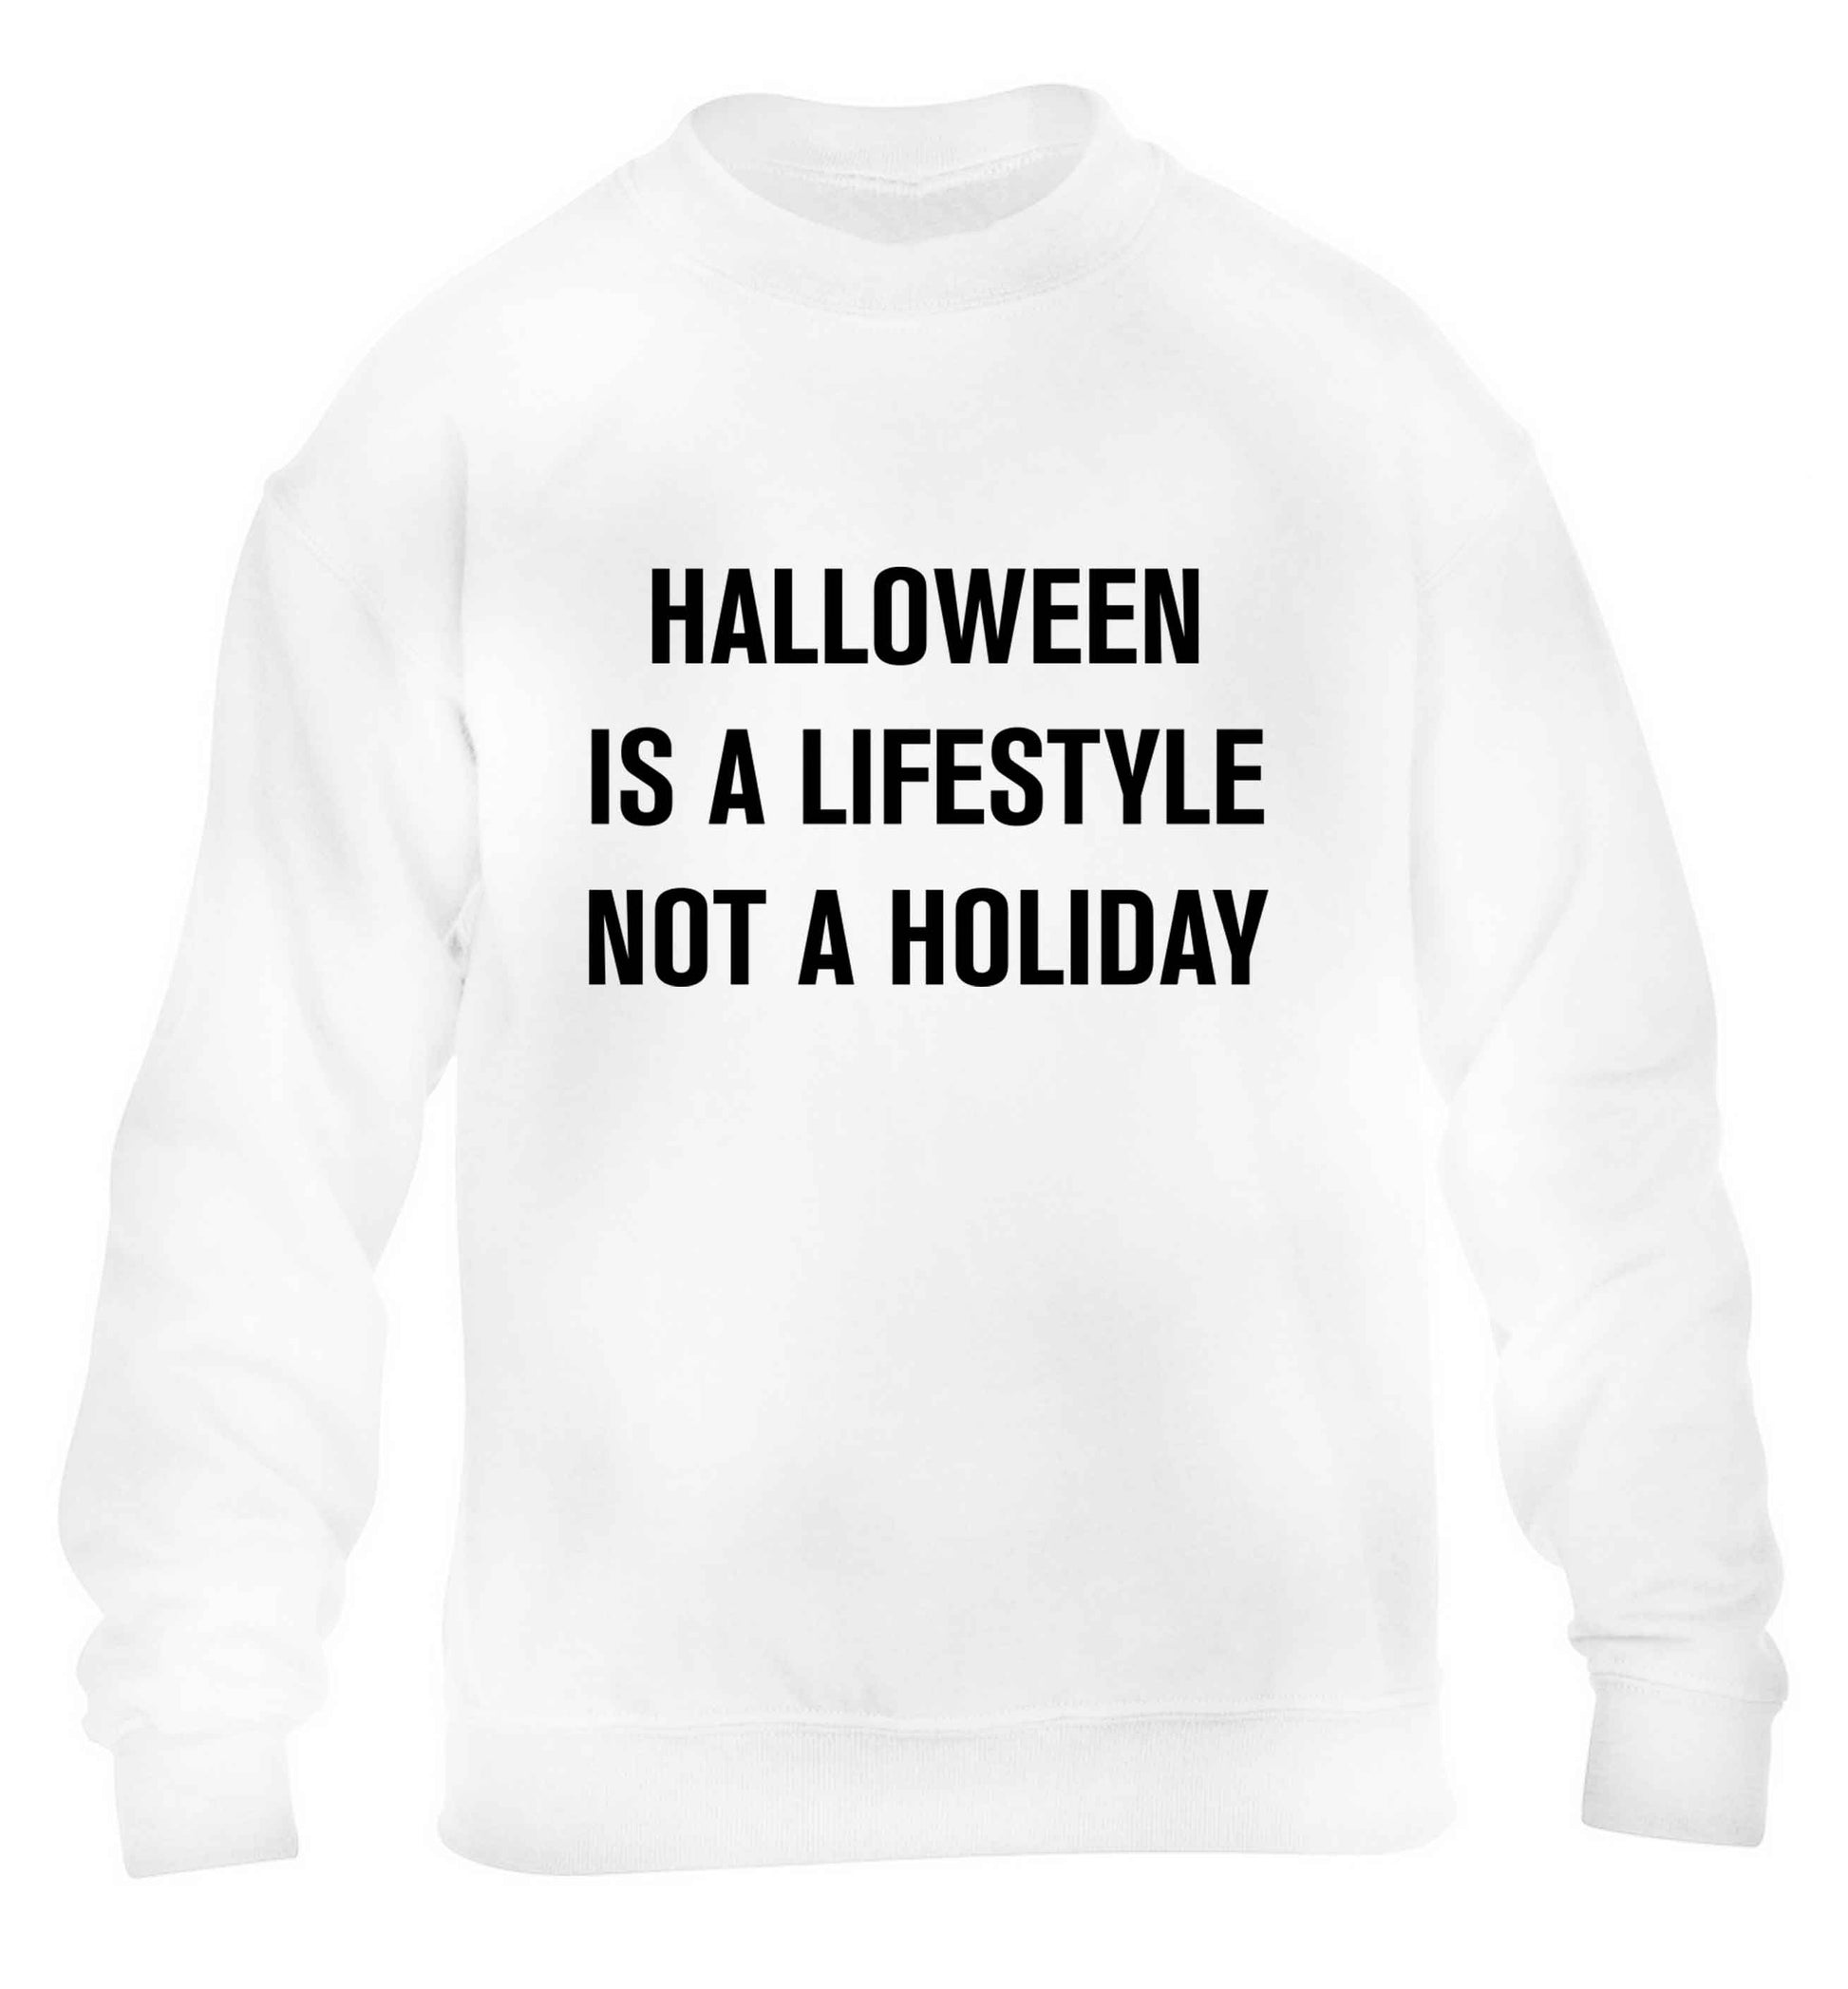 Halloween is a lifestyle not a holiday children's white sweater 12-13 Years